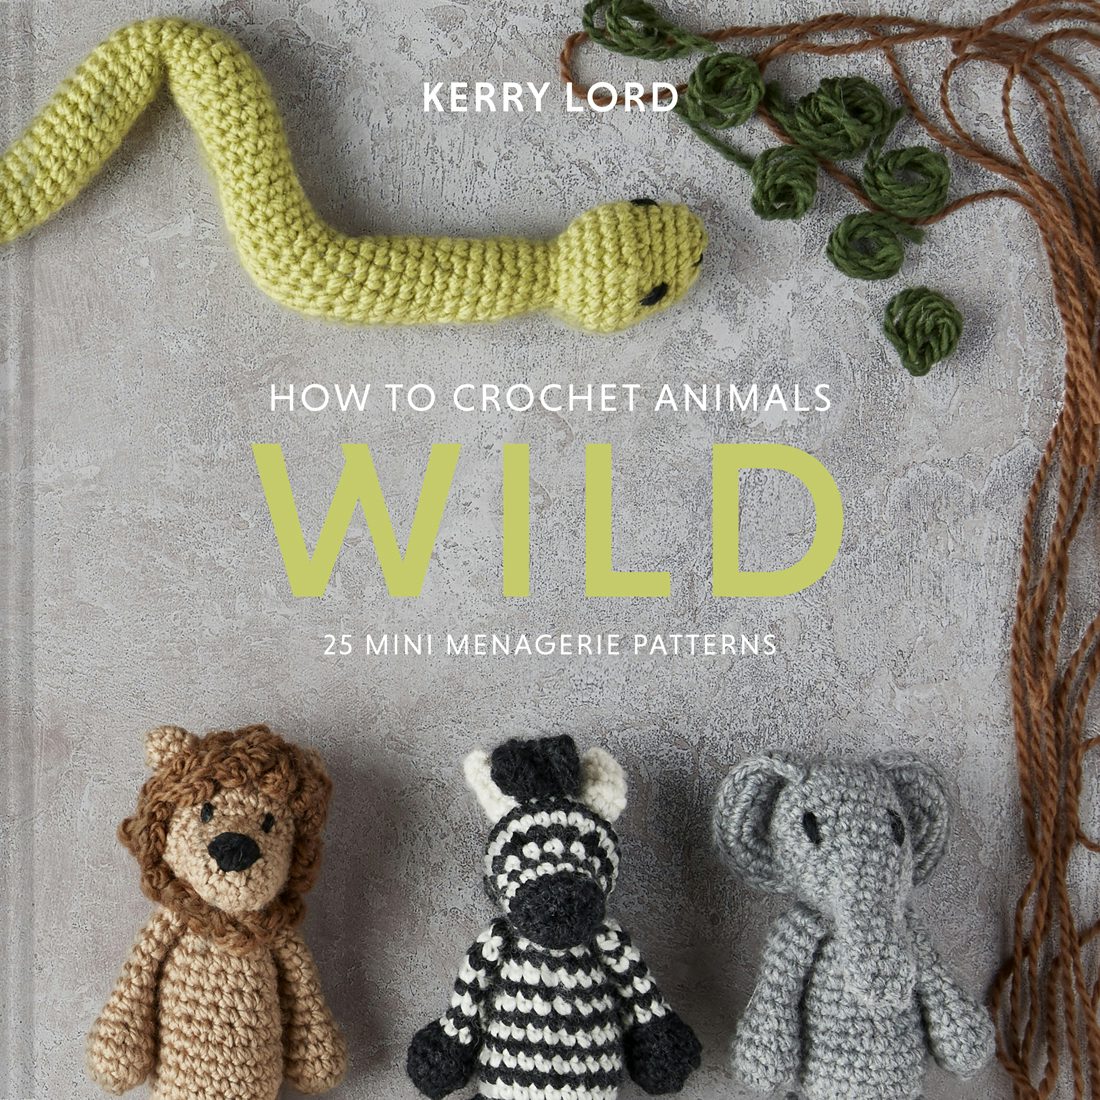 How to Crochet Animals: Wild by Kerry Lord: 9781454711346 - Union